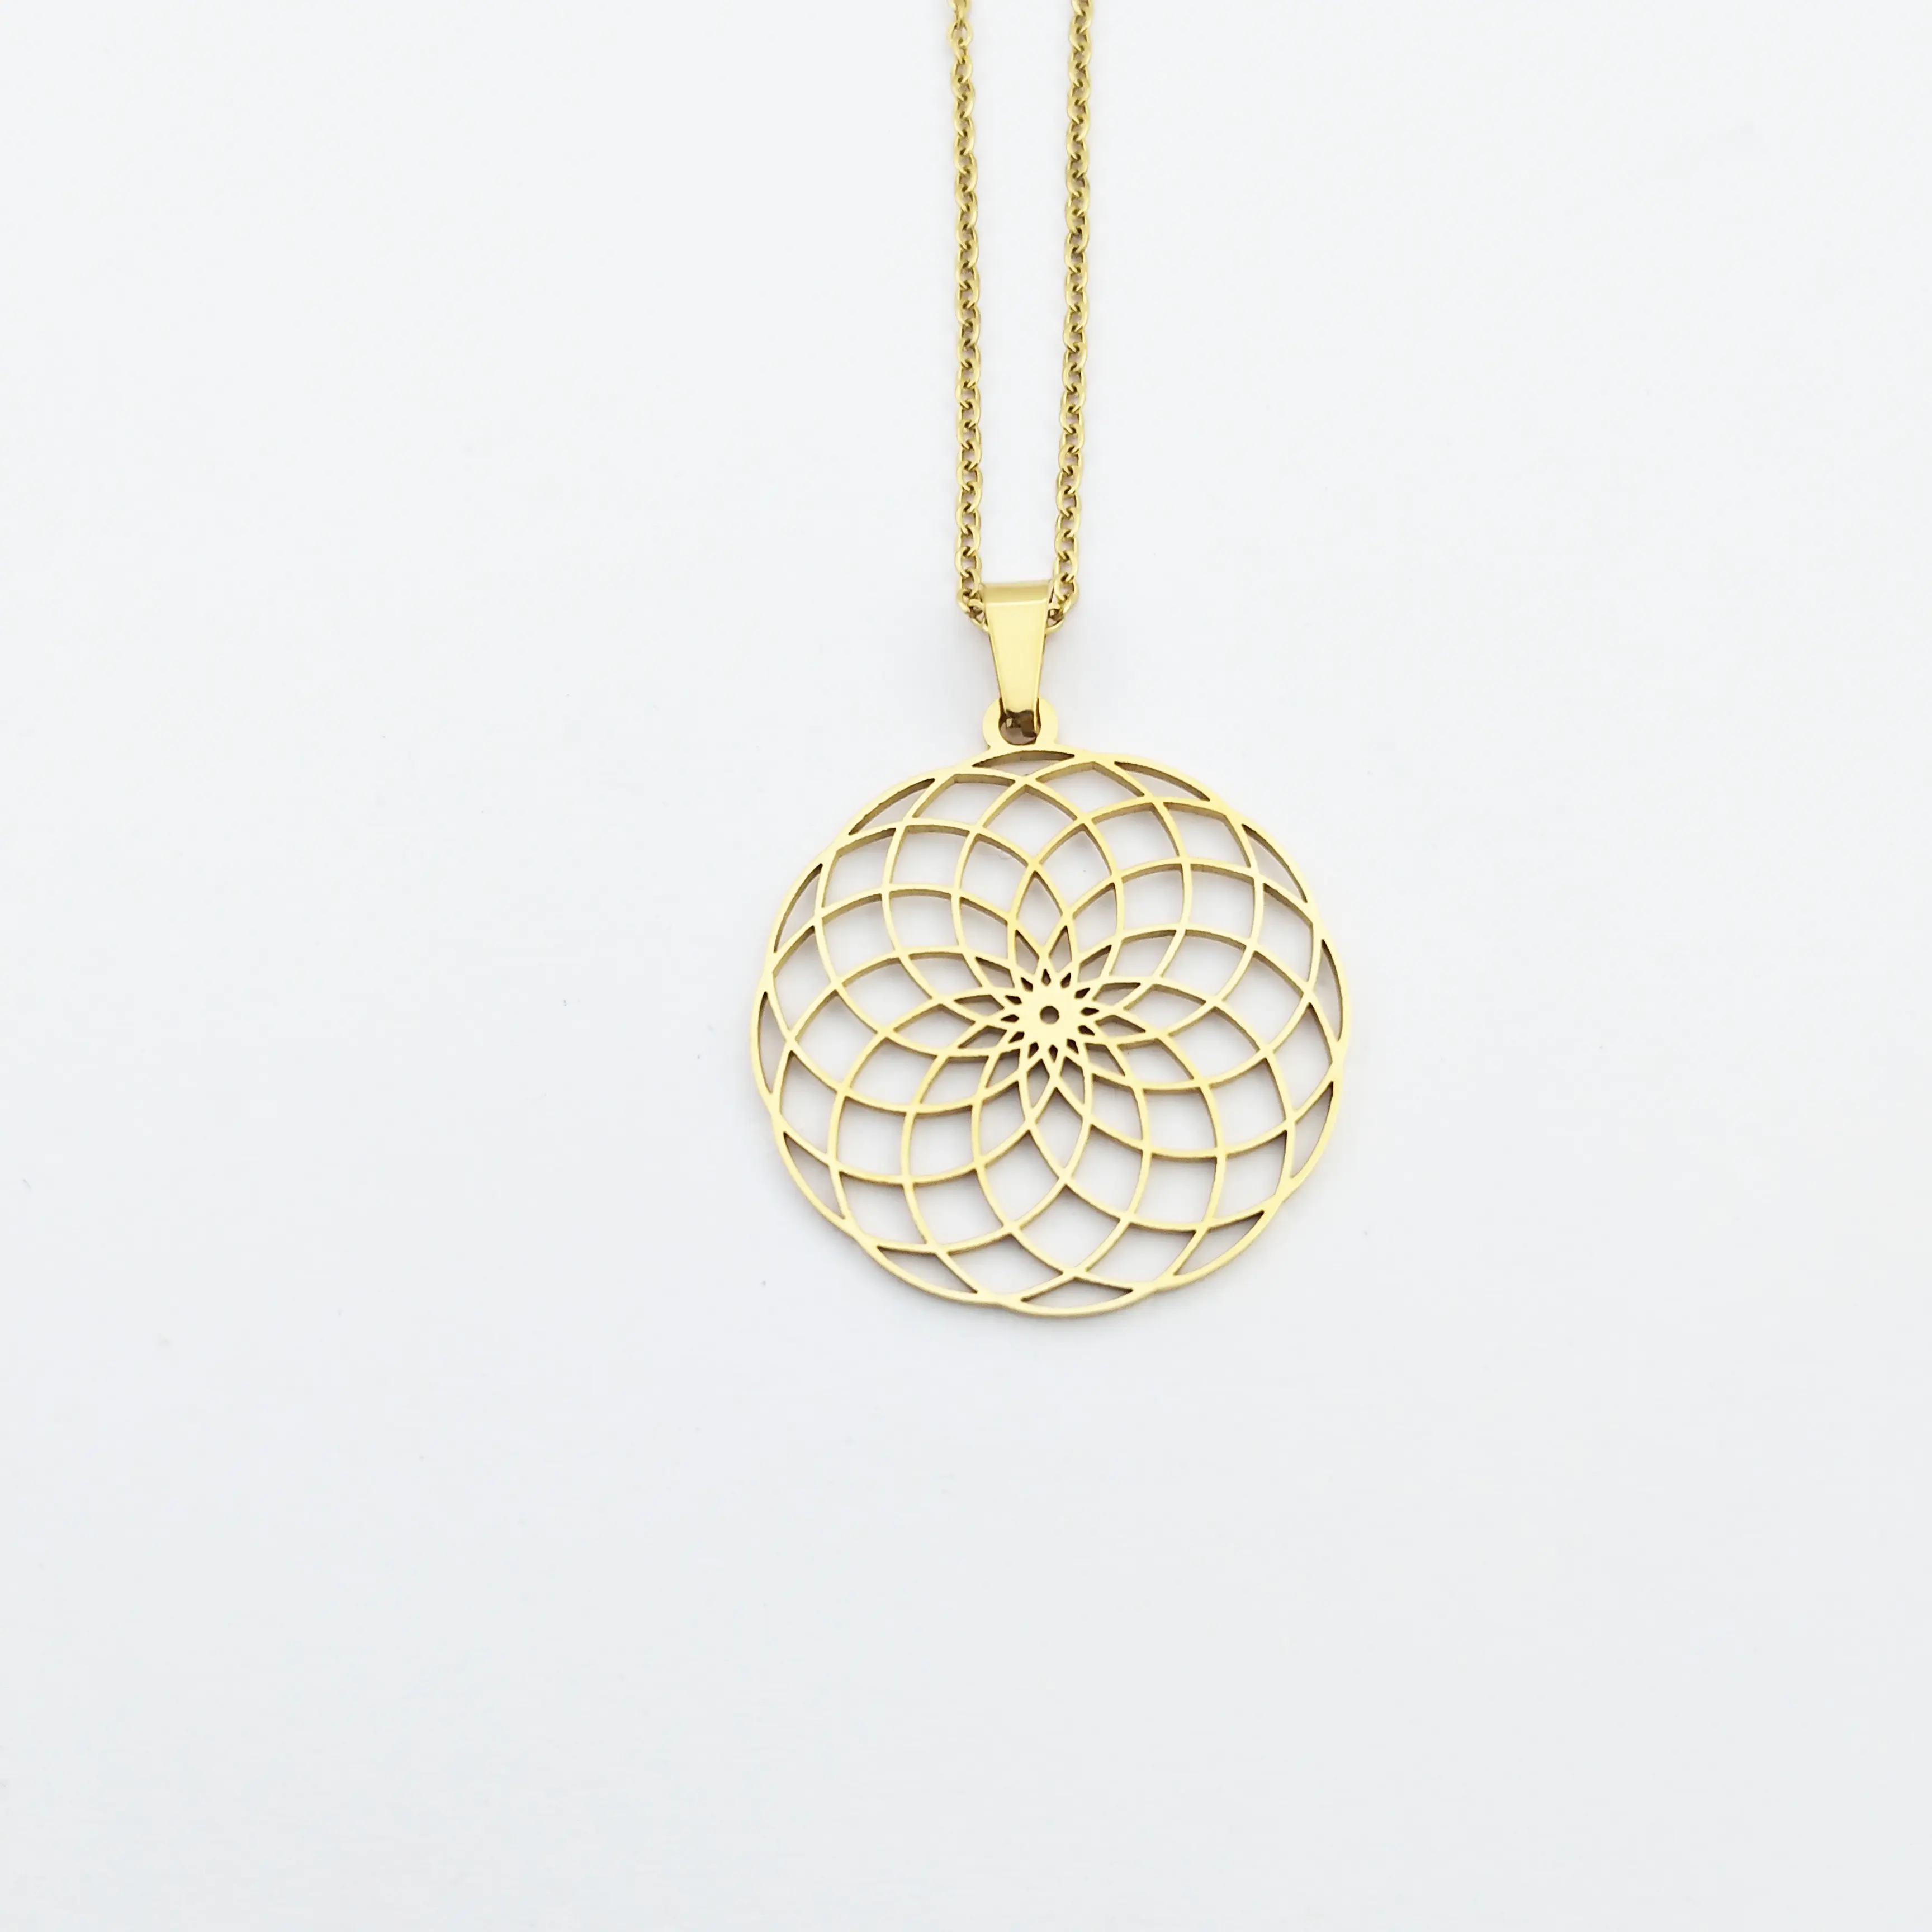 18k gold lotus flower pendant necklace round disc flat cable chain charms para collar tendencia necklace from muse factory